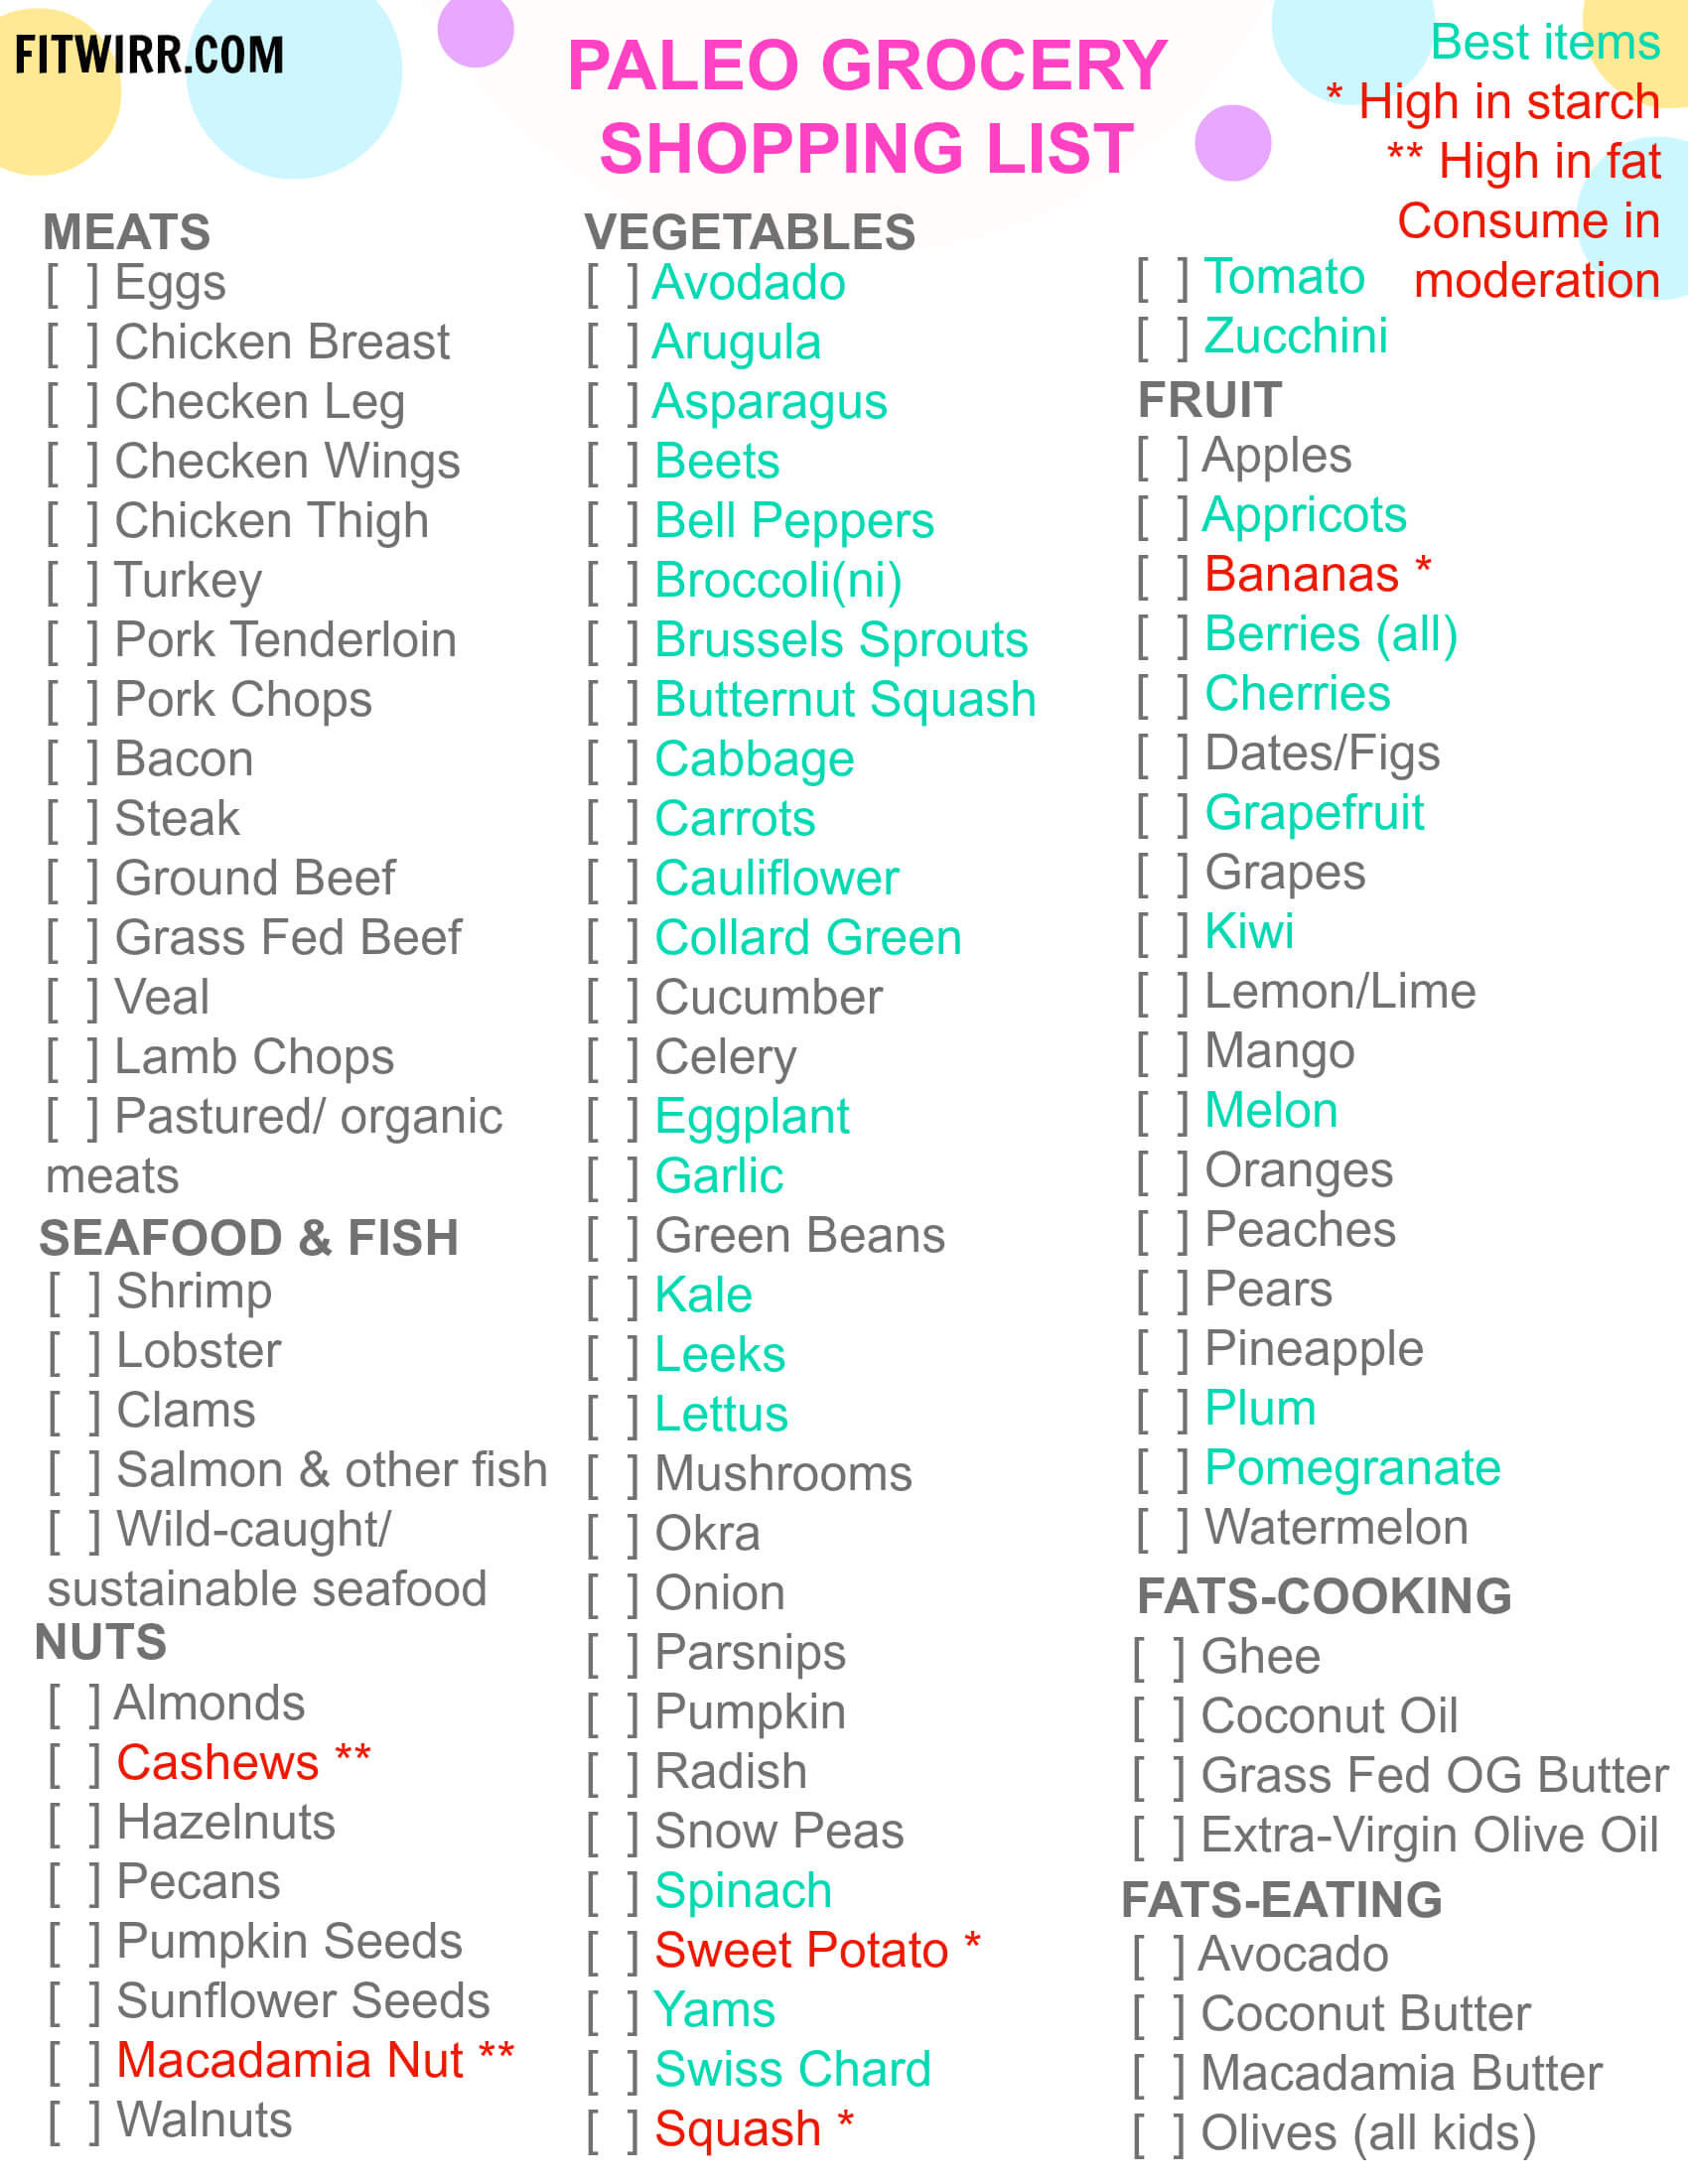 Paleo Diet Foods List
 Paleo Diet Food List What to Eat and Not to Eat